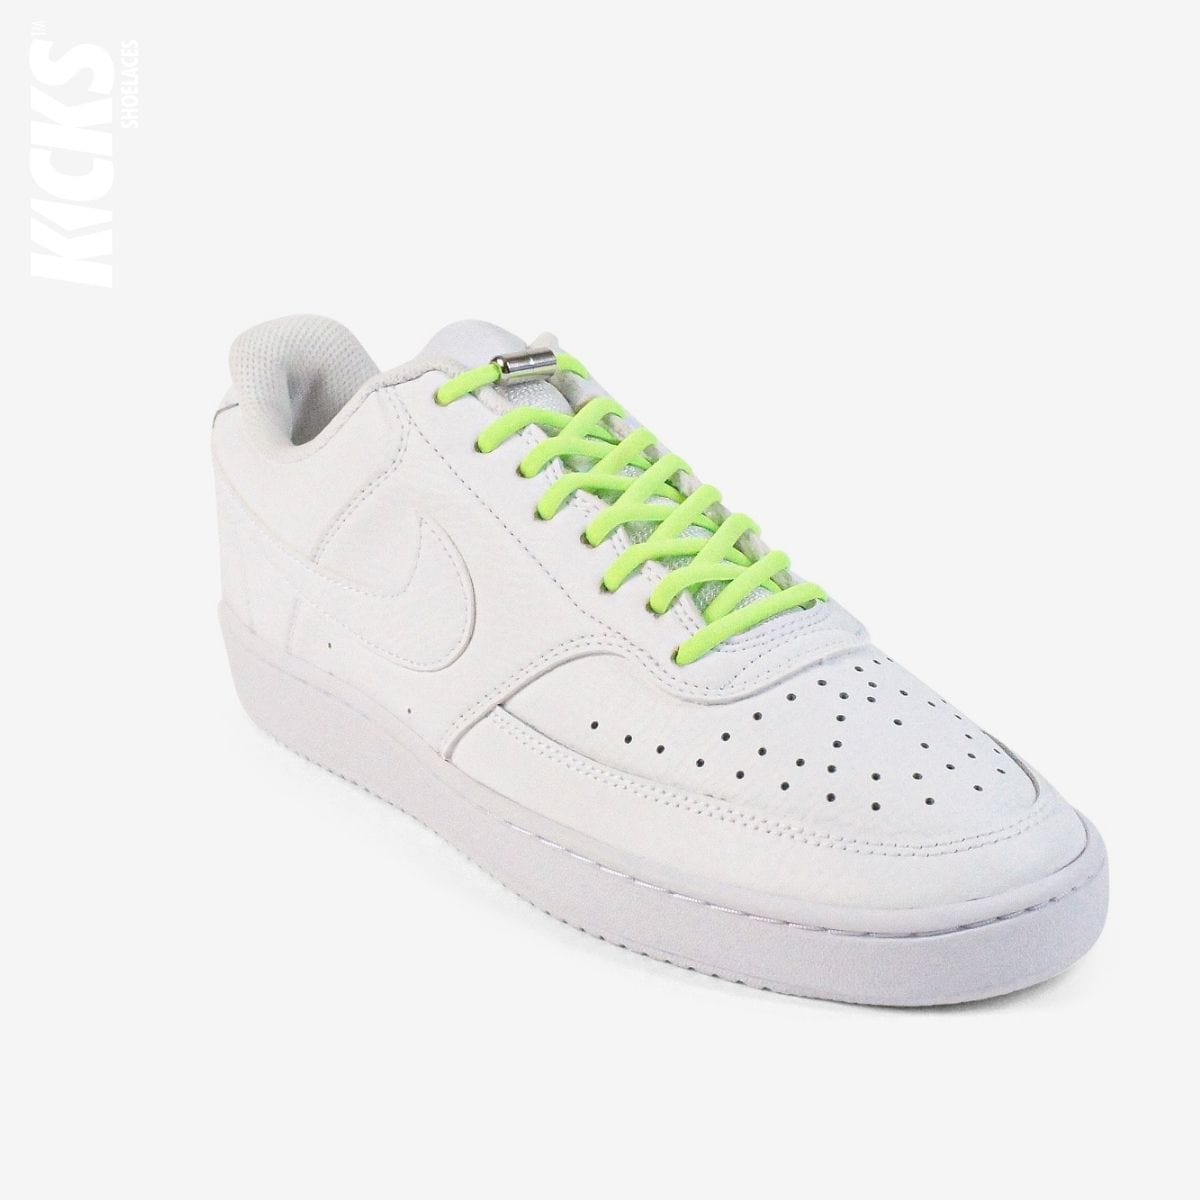 round-no-tie-shoelaces-with-fluorescent-green-laces-on-nike-white-sneakers-by-kicks-shoelaces